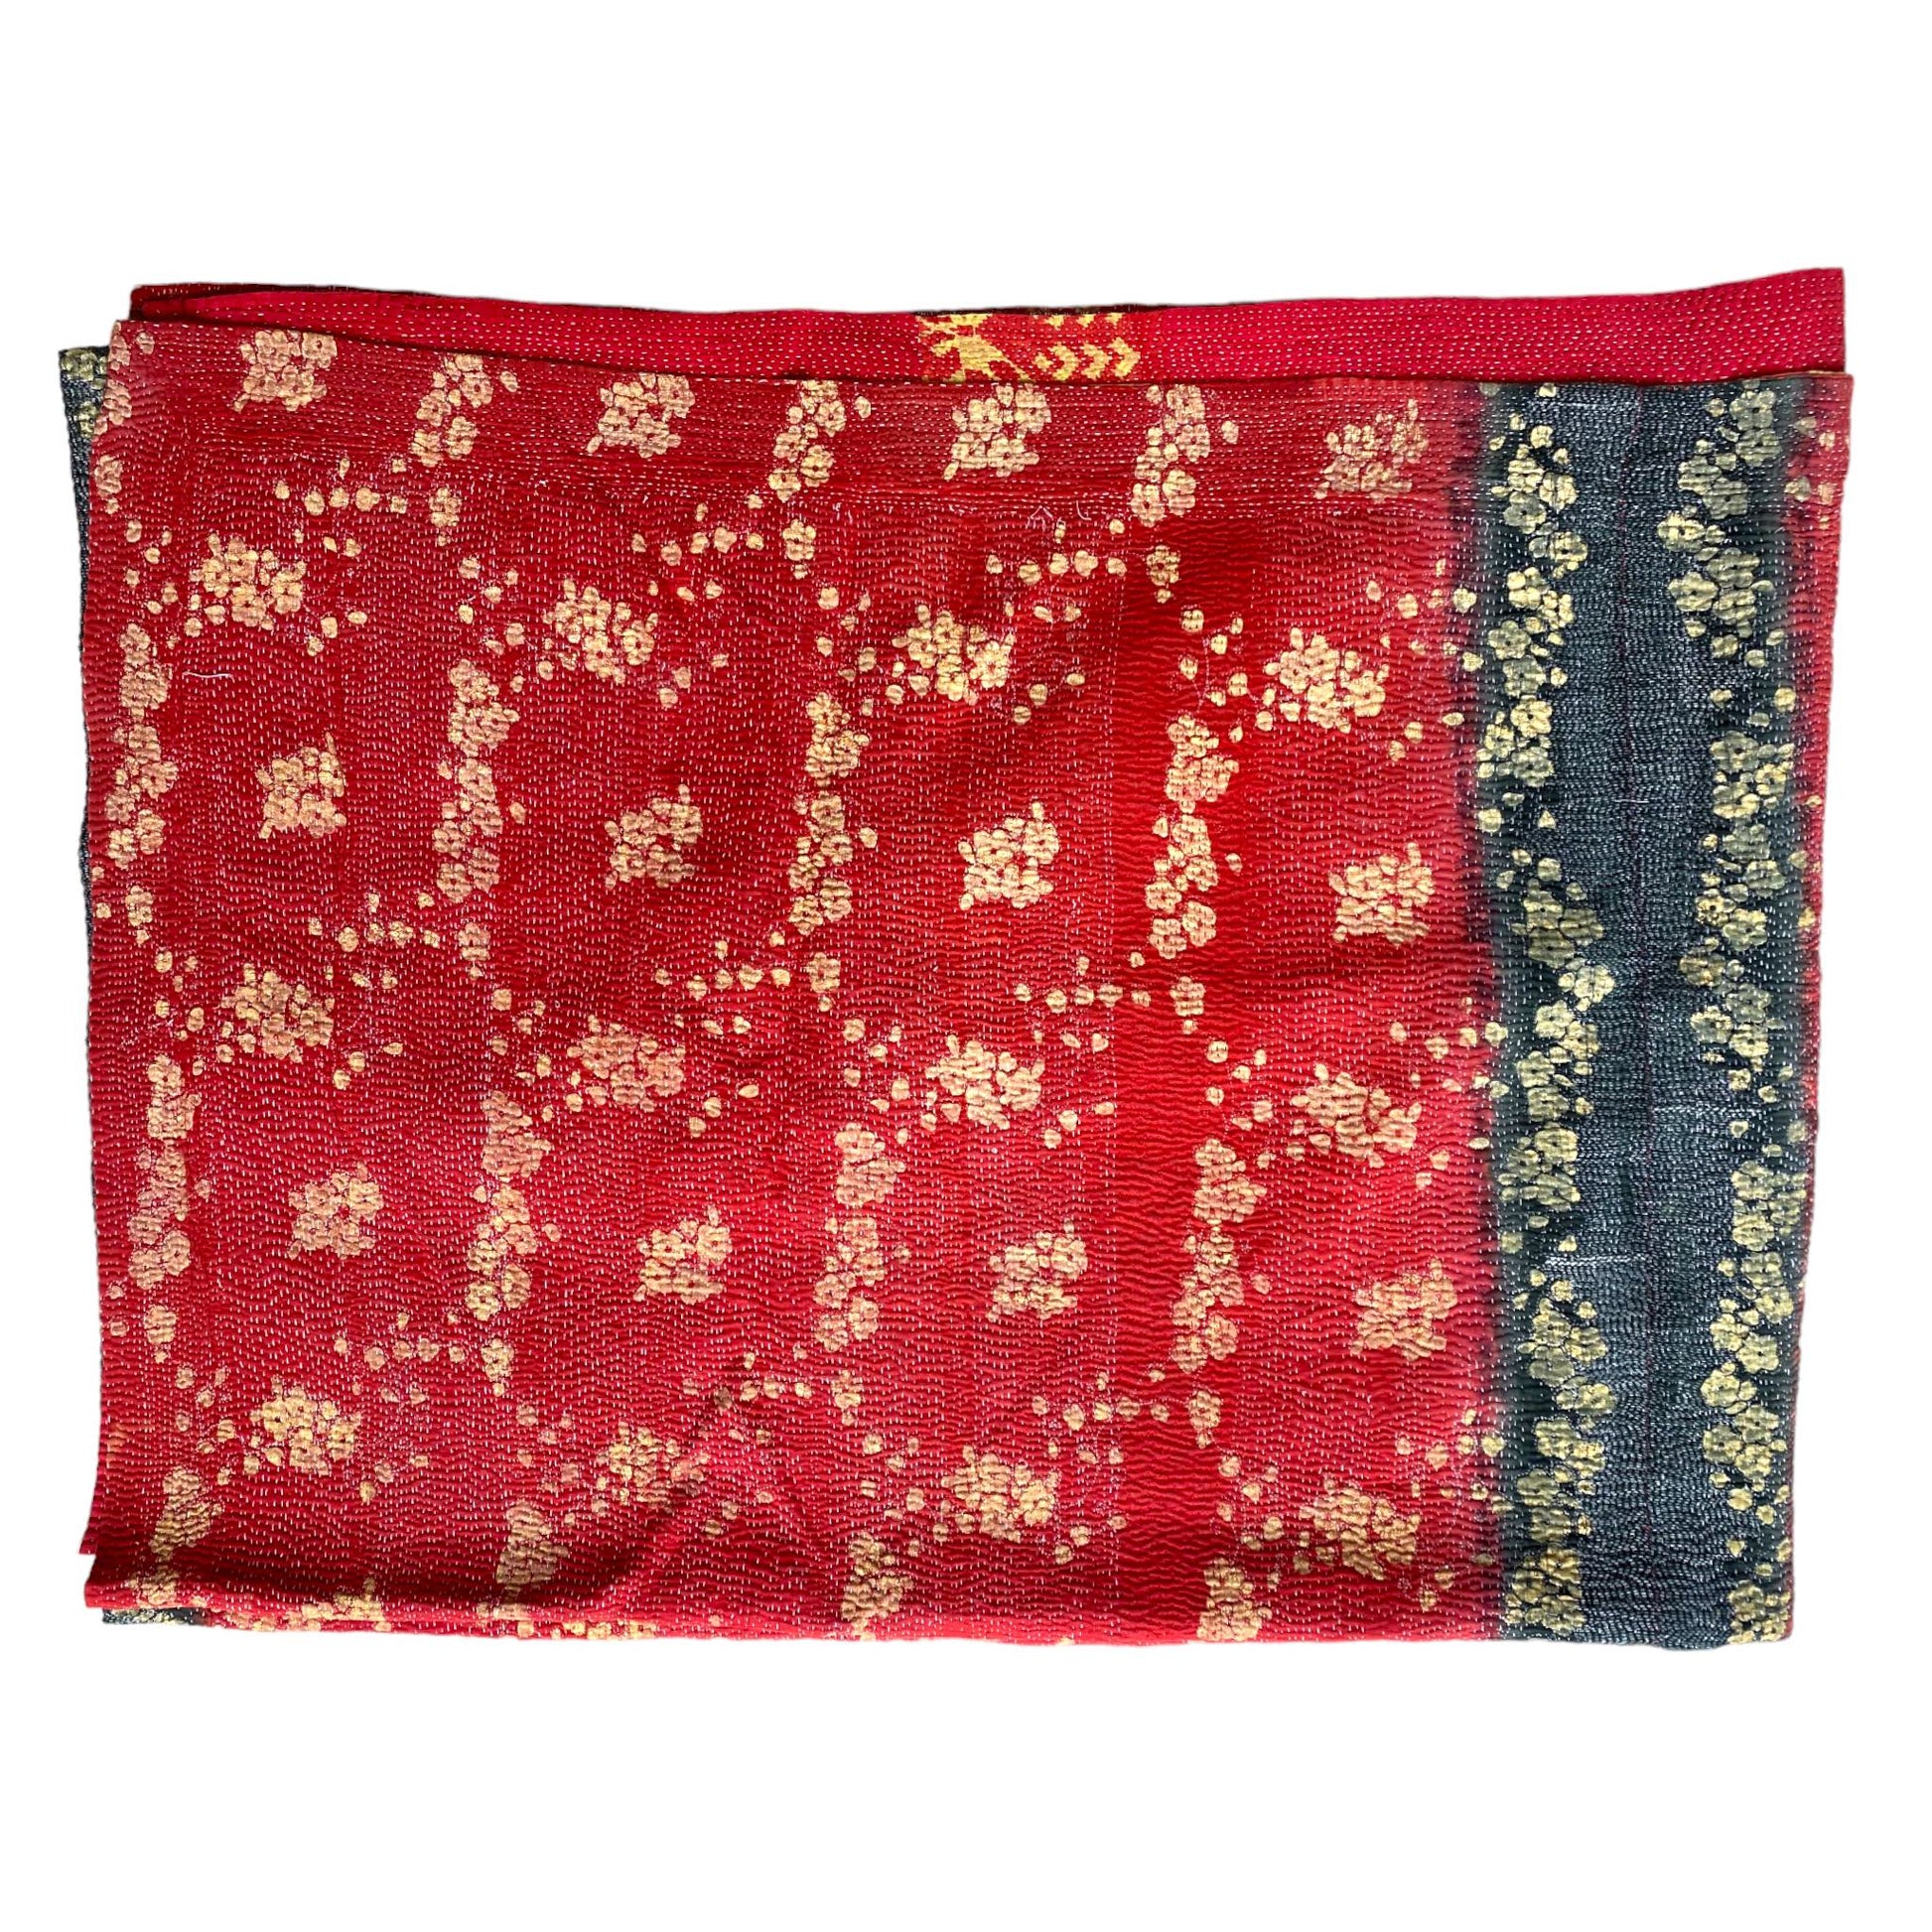 Red and yellow kantha throw 